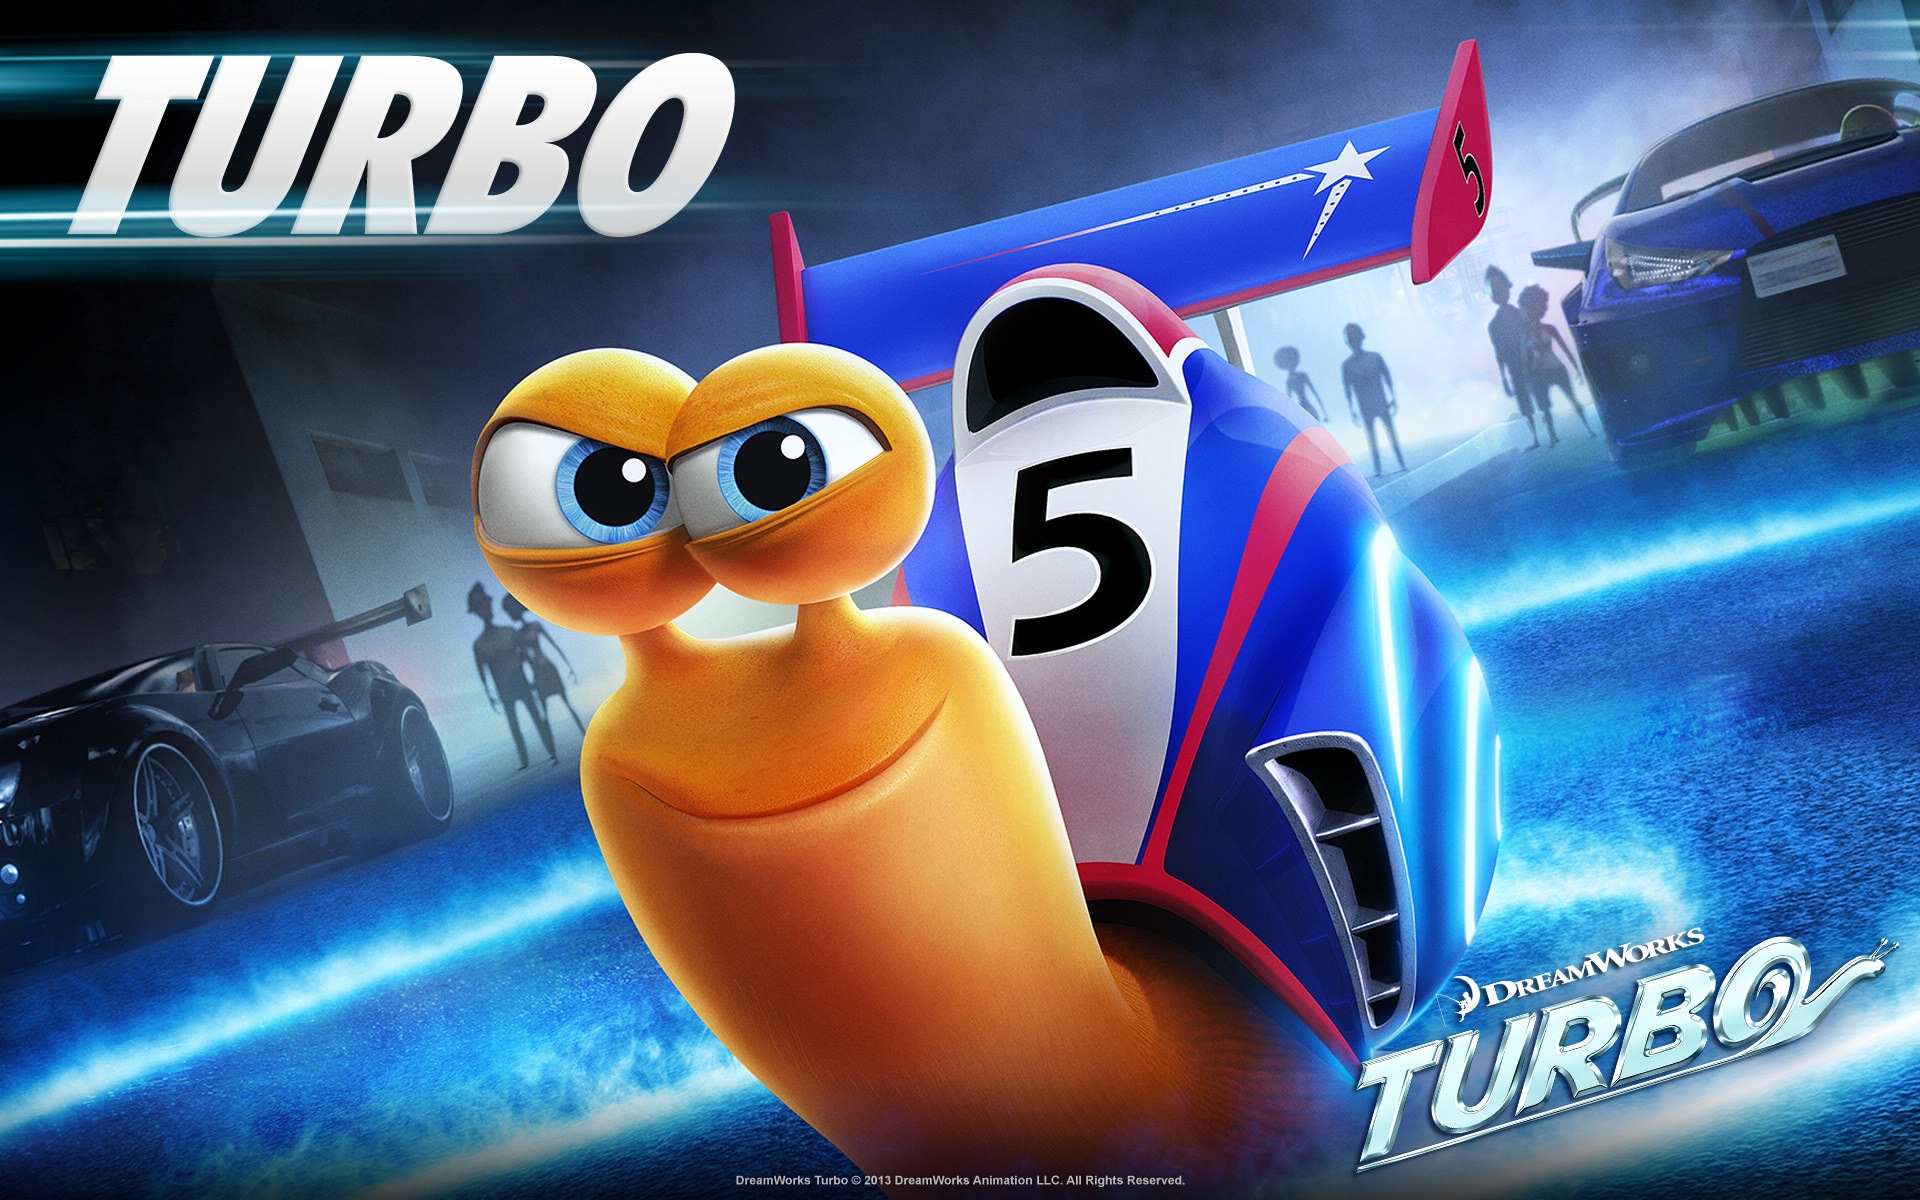 Turbo 3D movie HD wallpapers #9 - 1920x1200